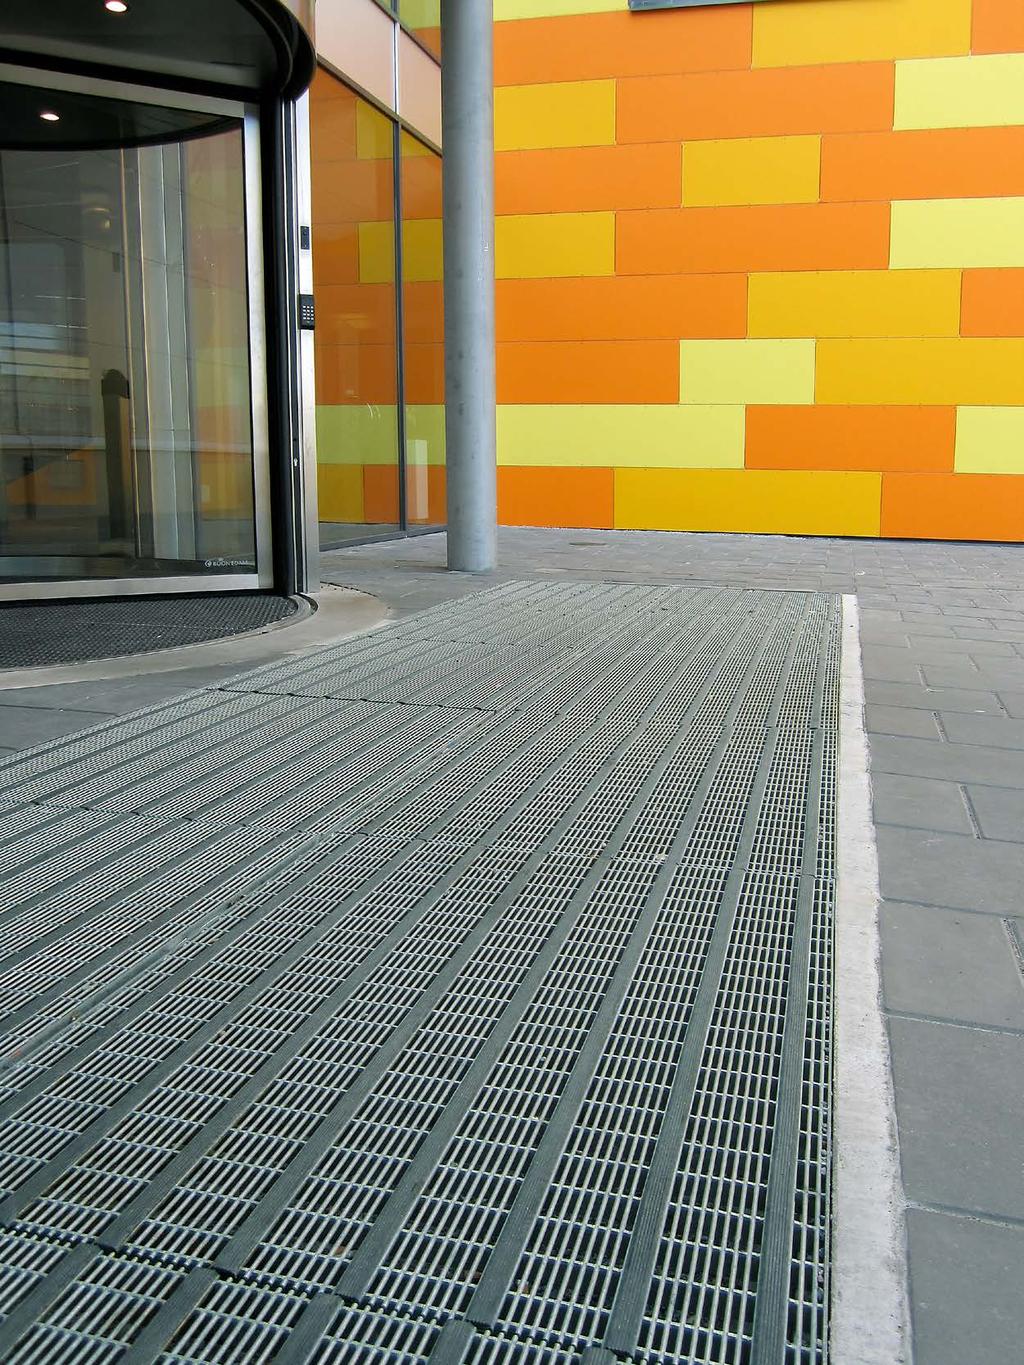 Entrance grating type AR1 Free spanning entrance grating in hot dip galvanised steel. Suitable in all entrances where you want an almost self-servicing, dirt collection function in a deeper recess.